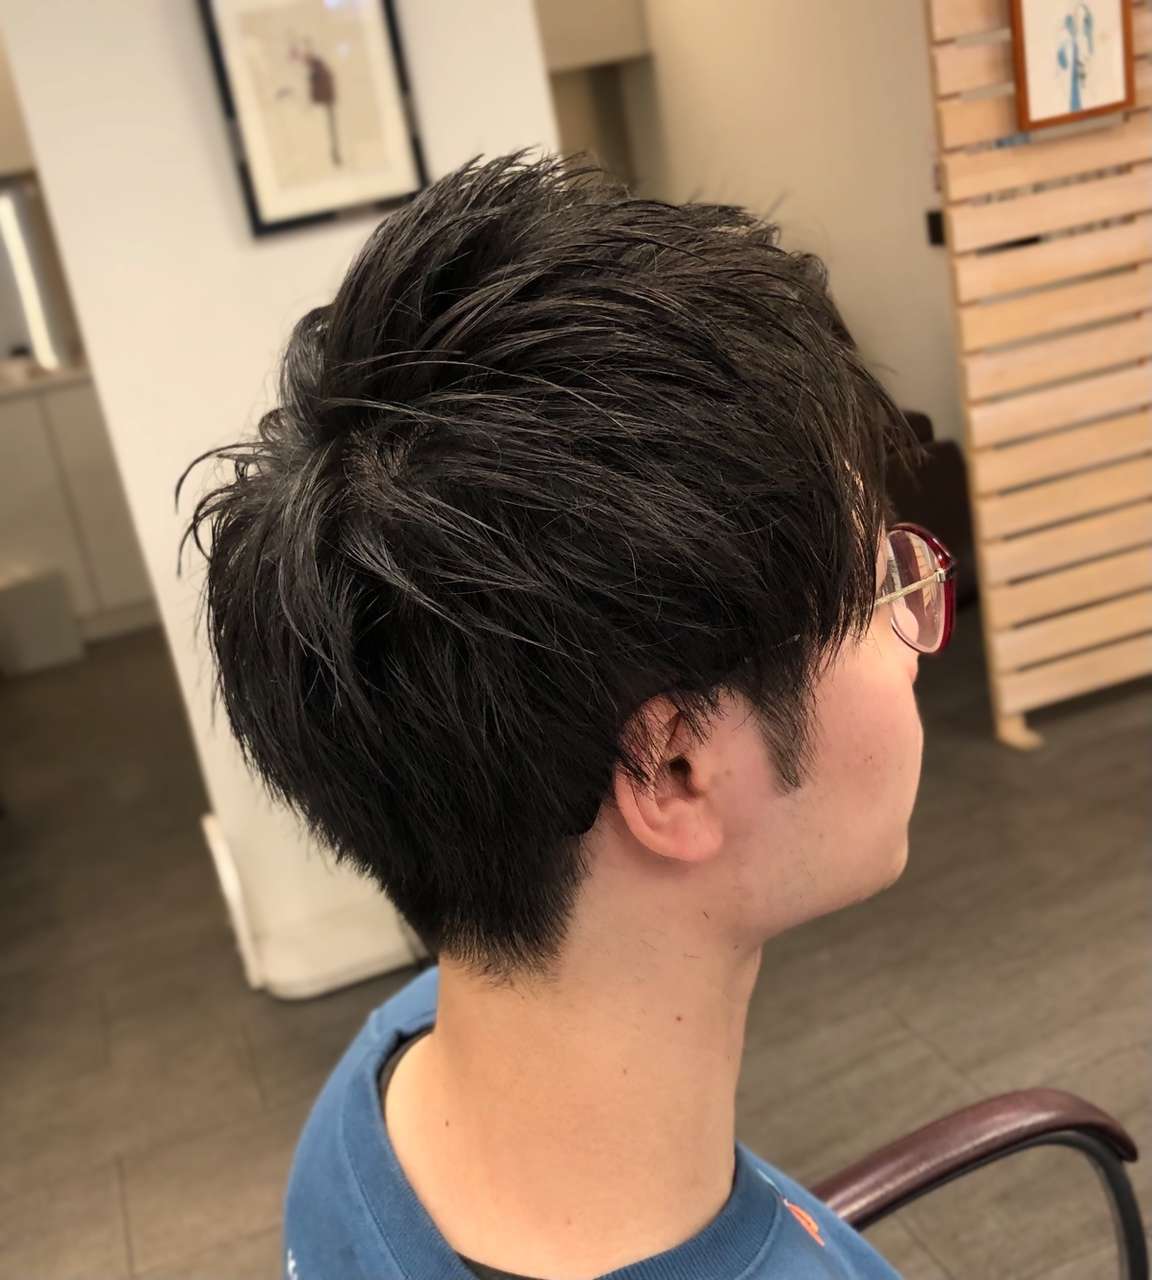 If you are a recommended hair salon for men's cuts at Nagoya Station & International Center Station, go to Cockney